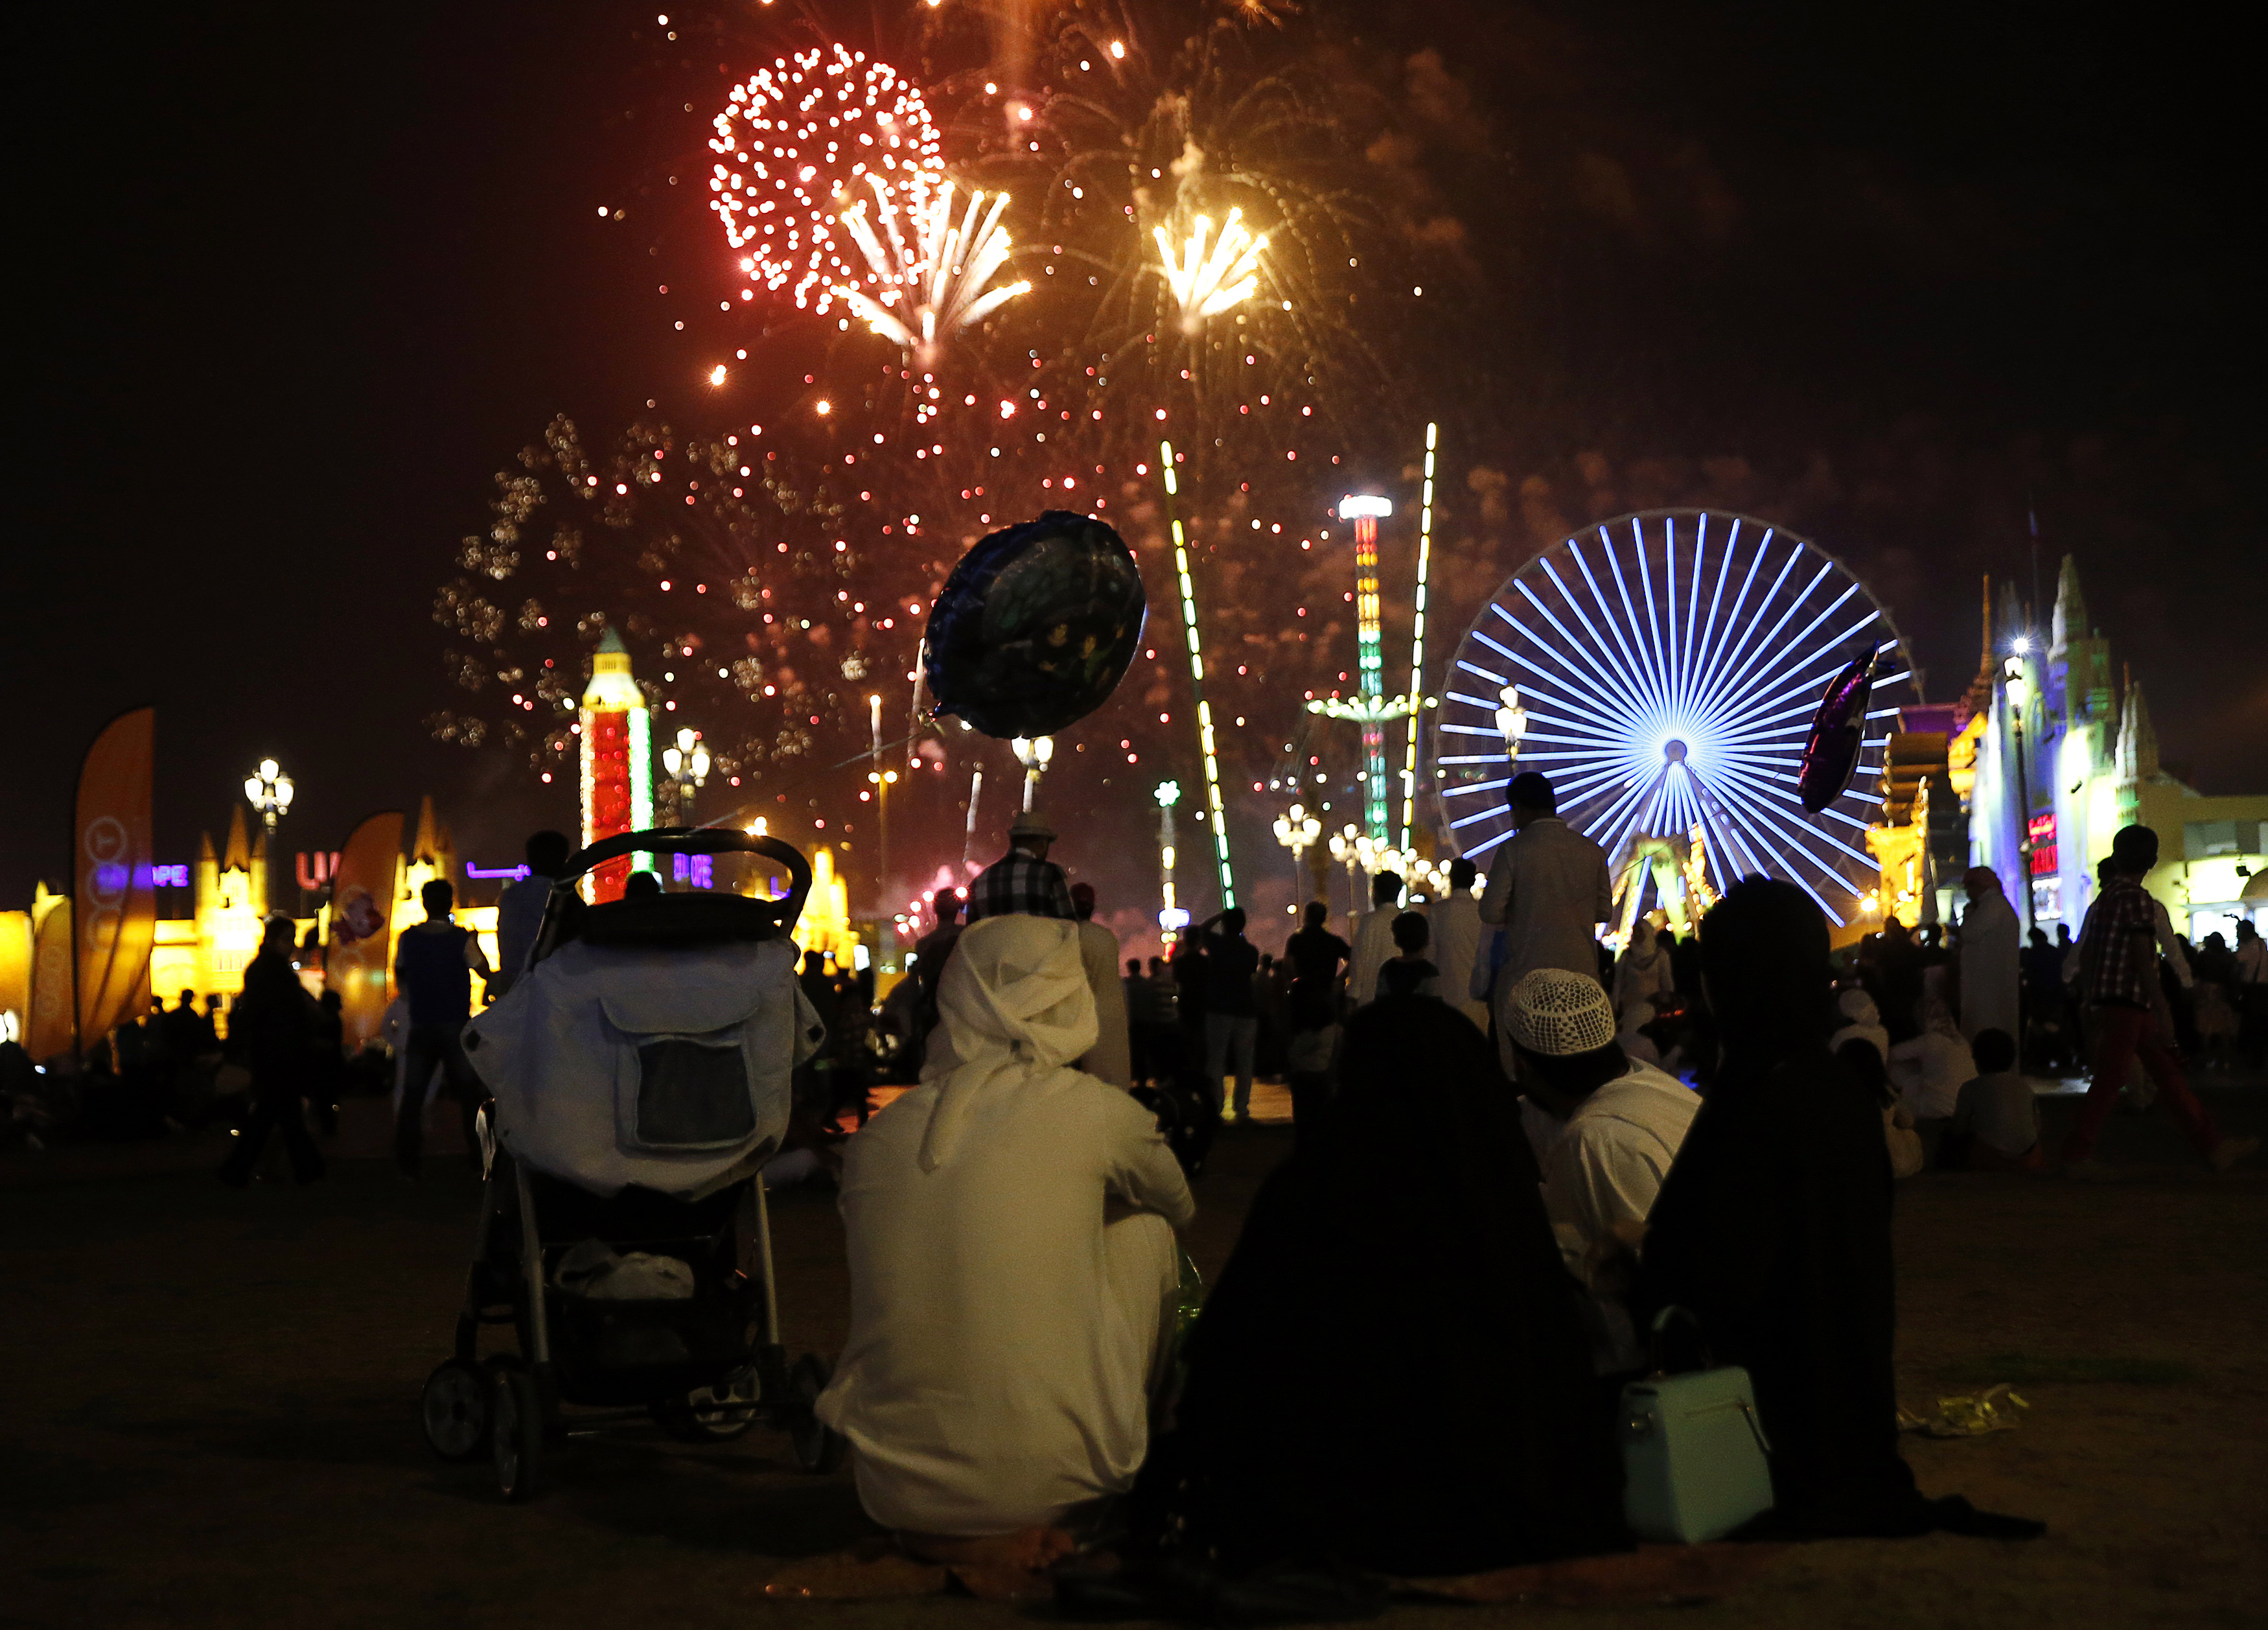 An Emirati family watches the fireworks display at the Global Village in Dubai